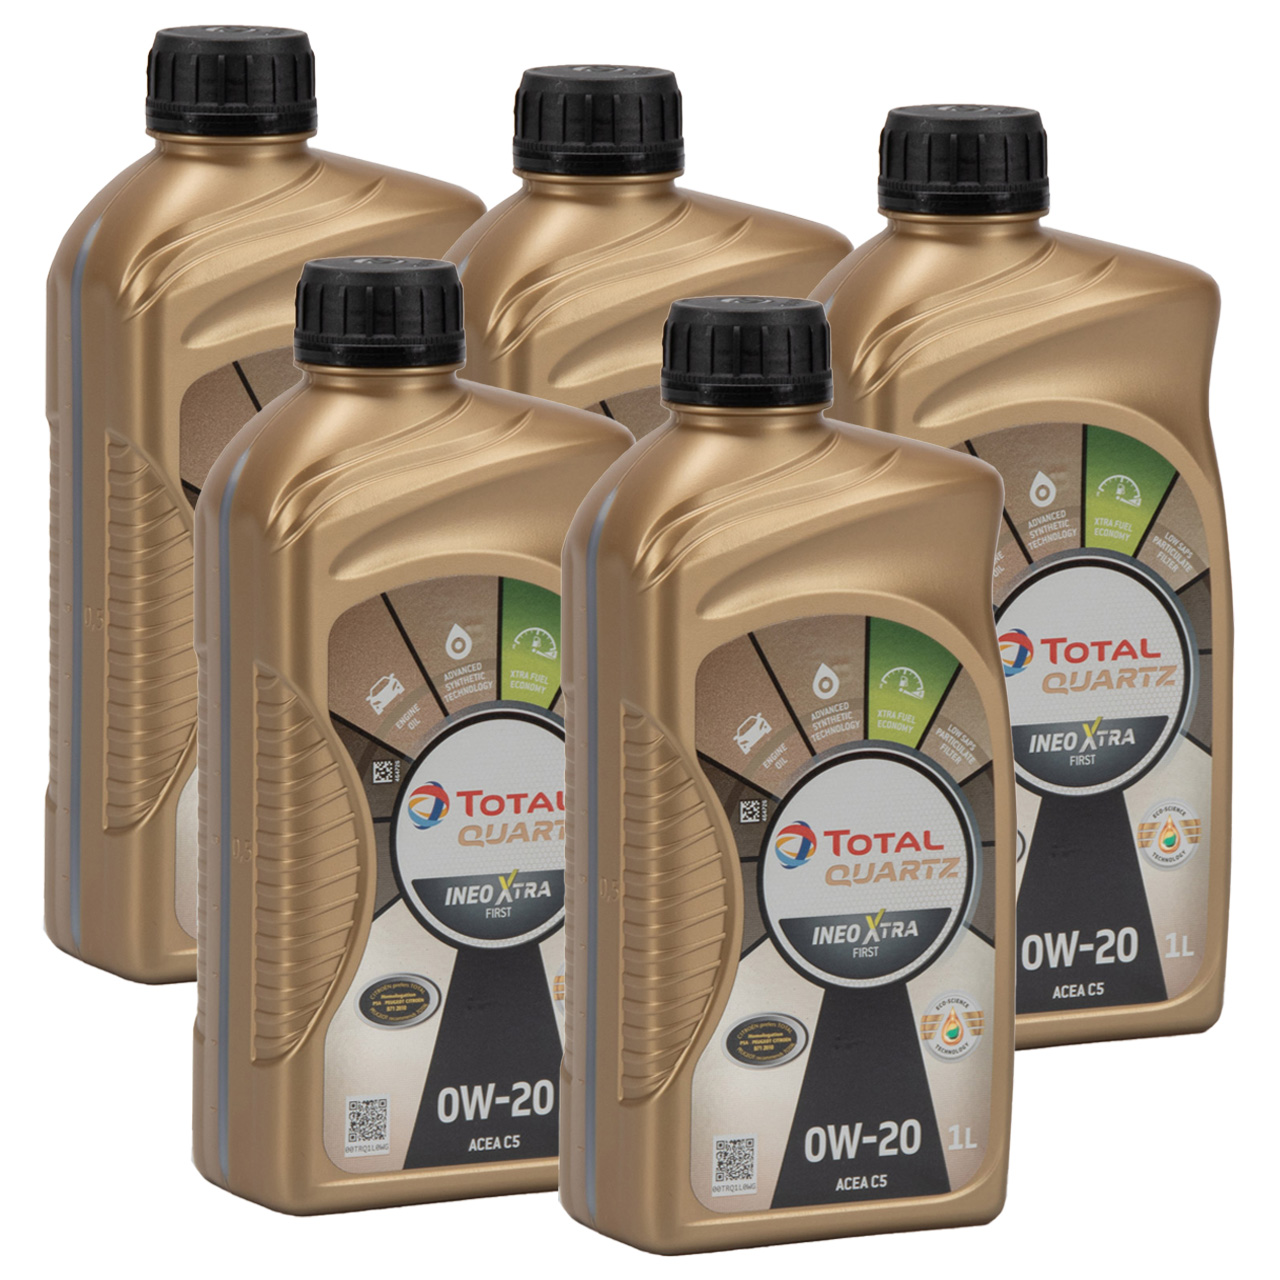 TOTAL Quartz Ineo First 0w30 Fully Synthetic Engine Oil 5 Litre 5l PSA  PEUGEOT